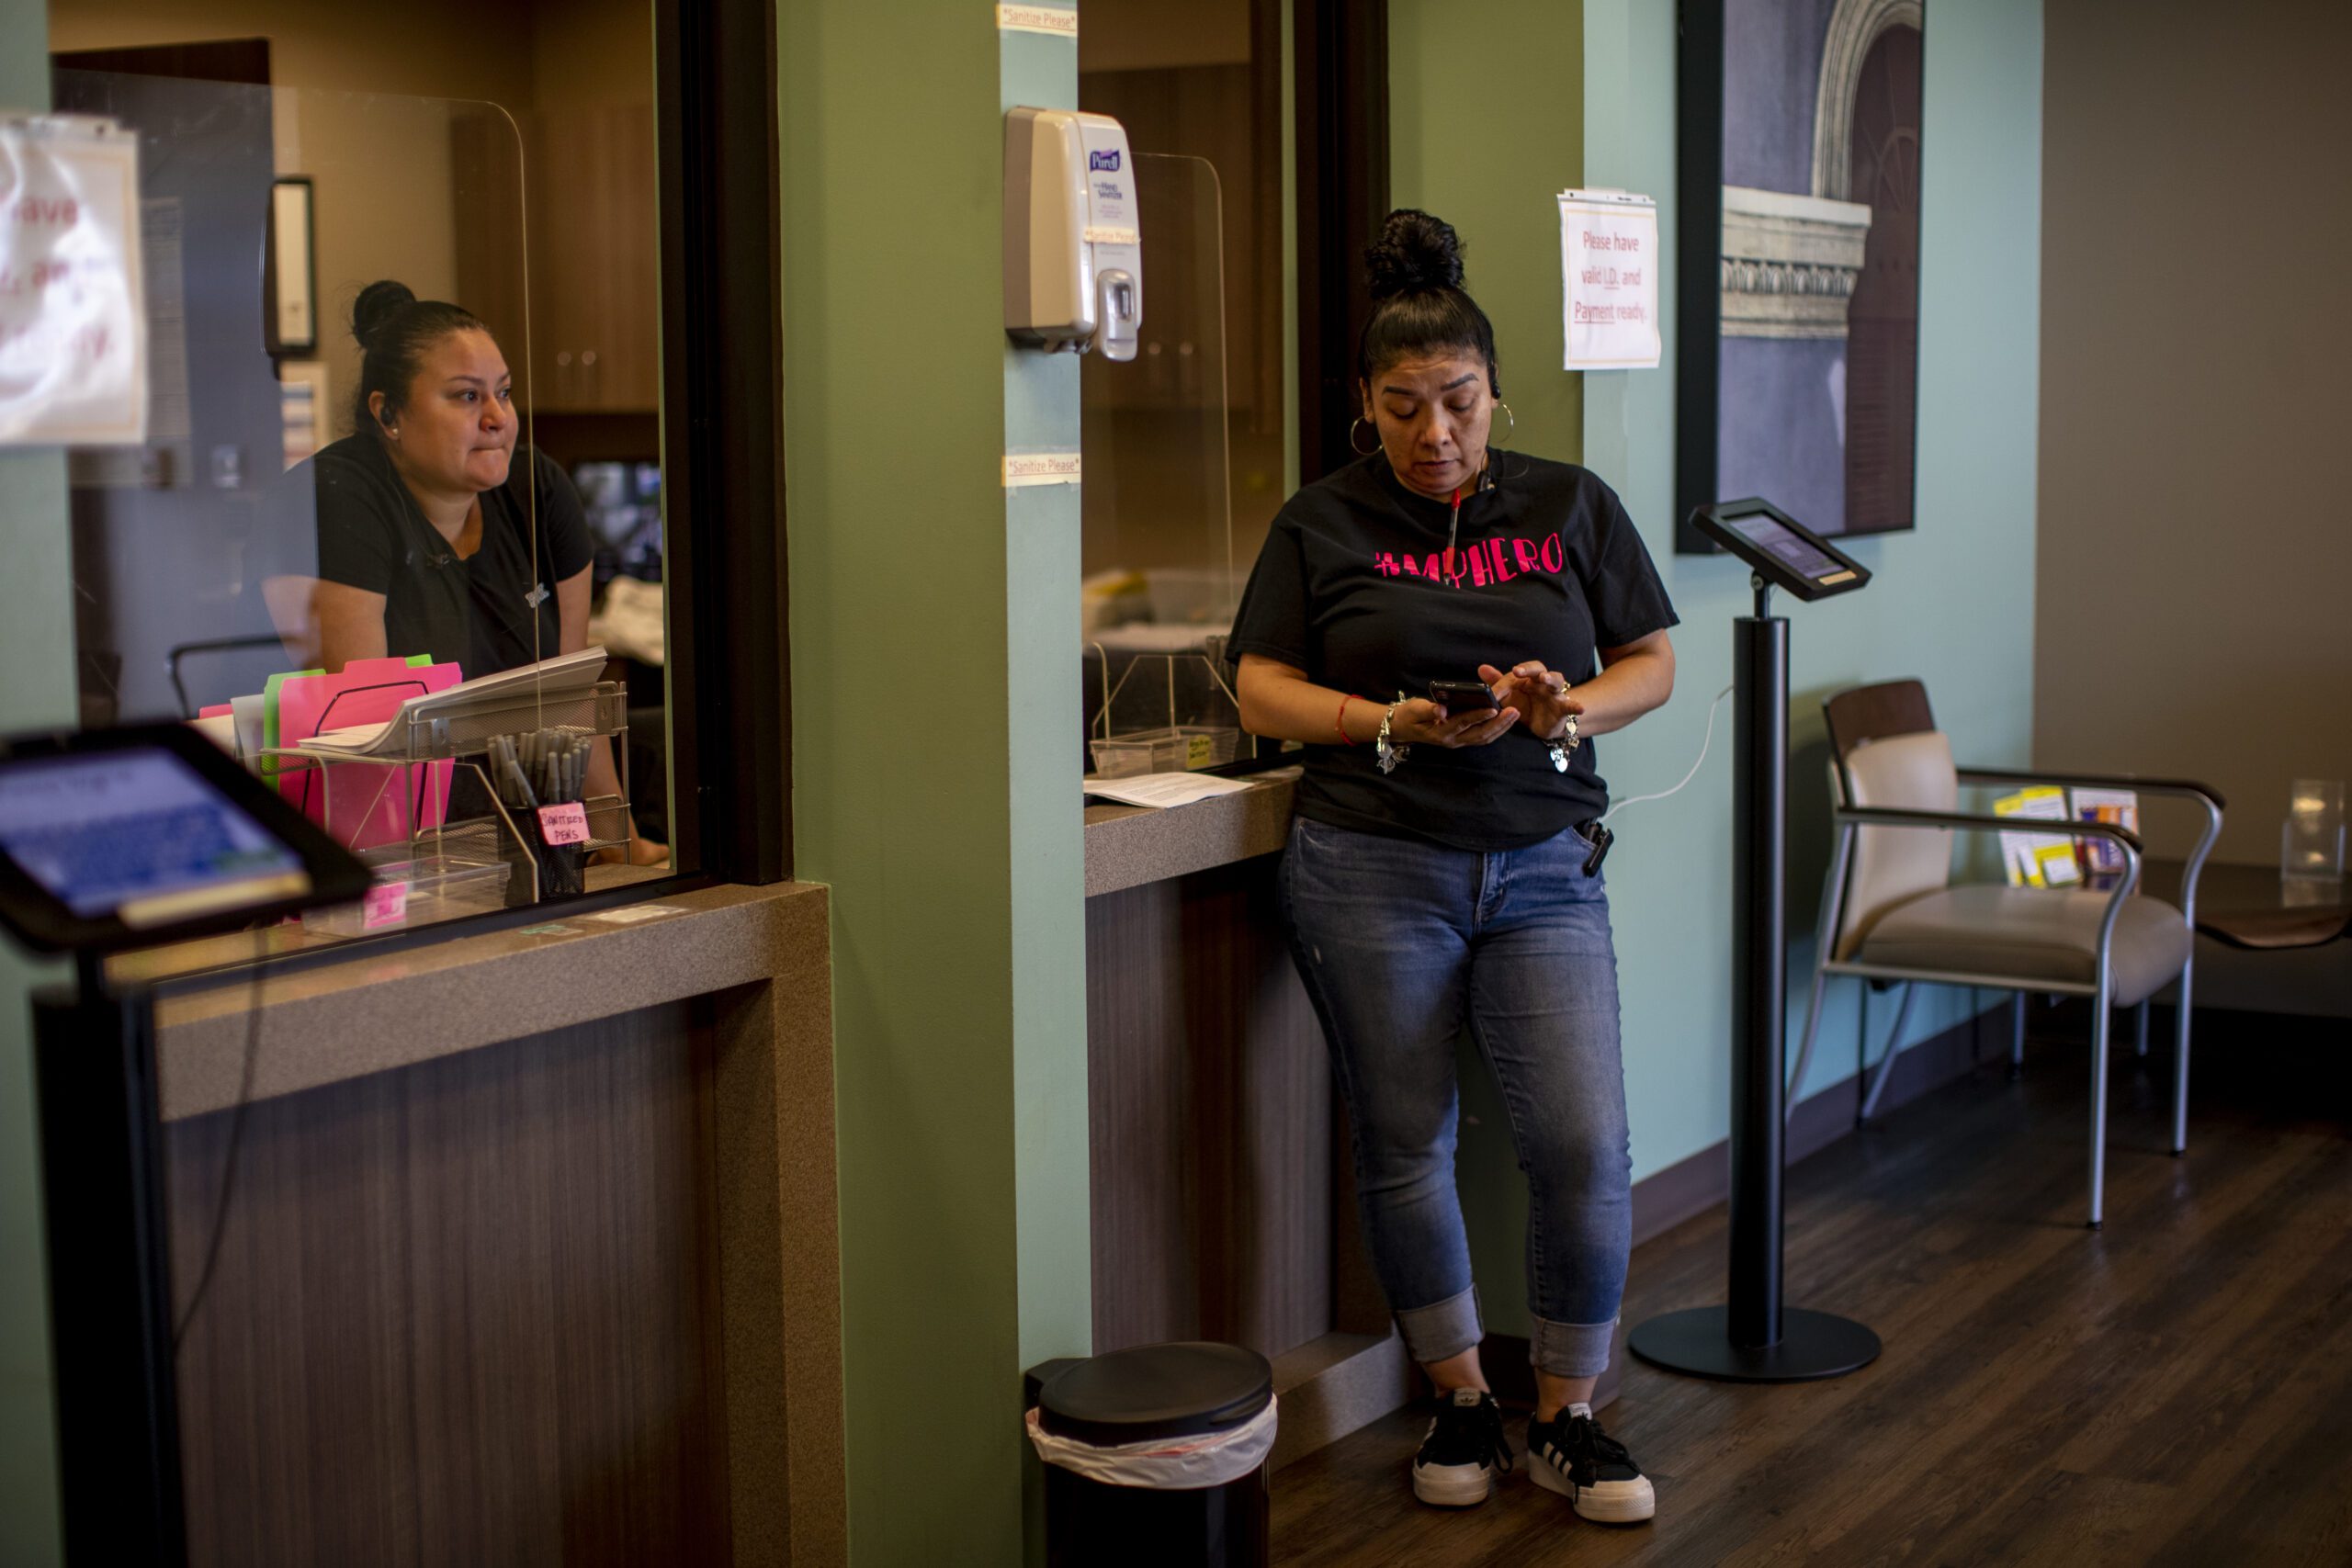 Staff members stand in an abortion clinic waiting room.